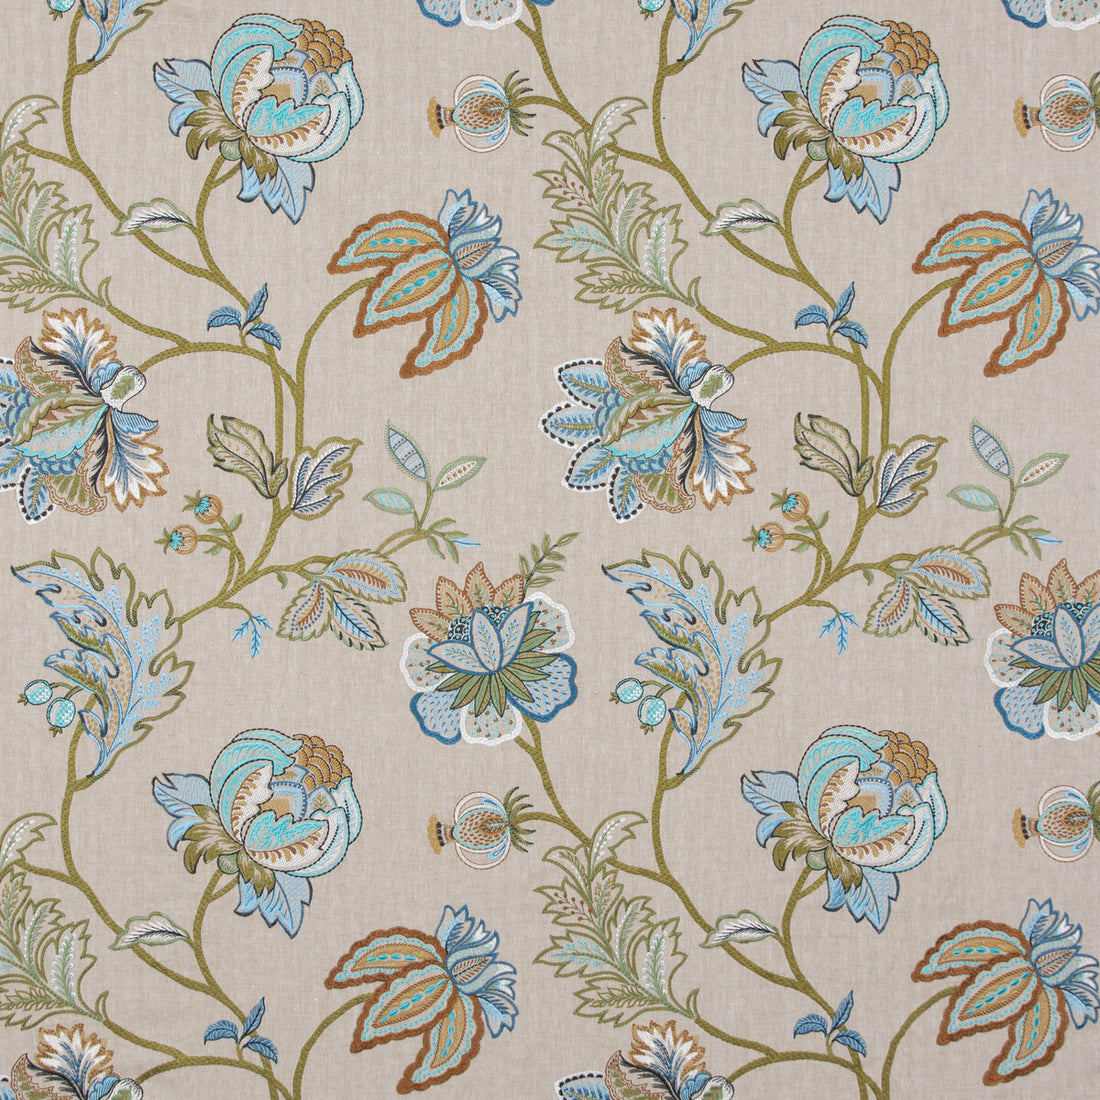 Agra fabric in teal color - pattern BF10942.2.0 - by G P &amp; J Baker in the Caspian collection